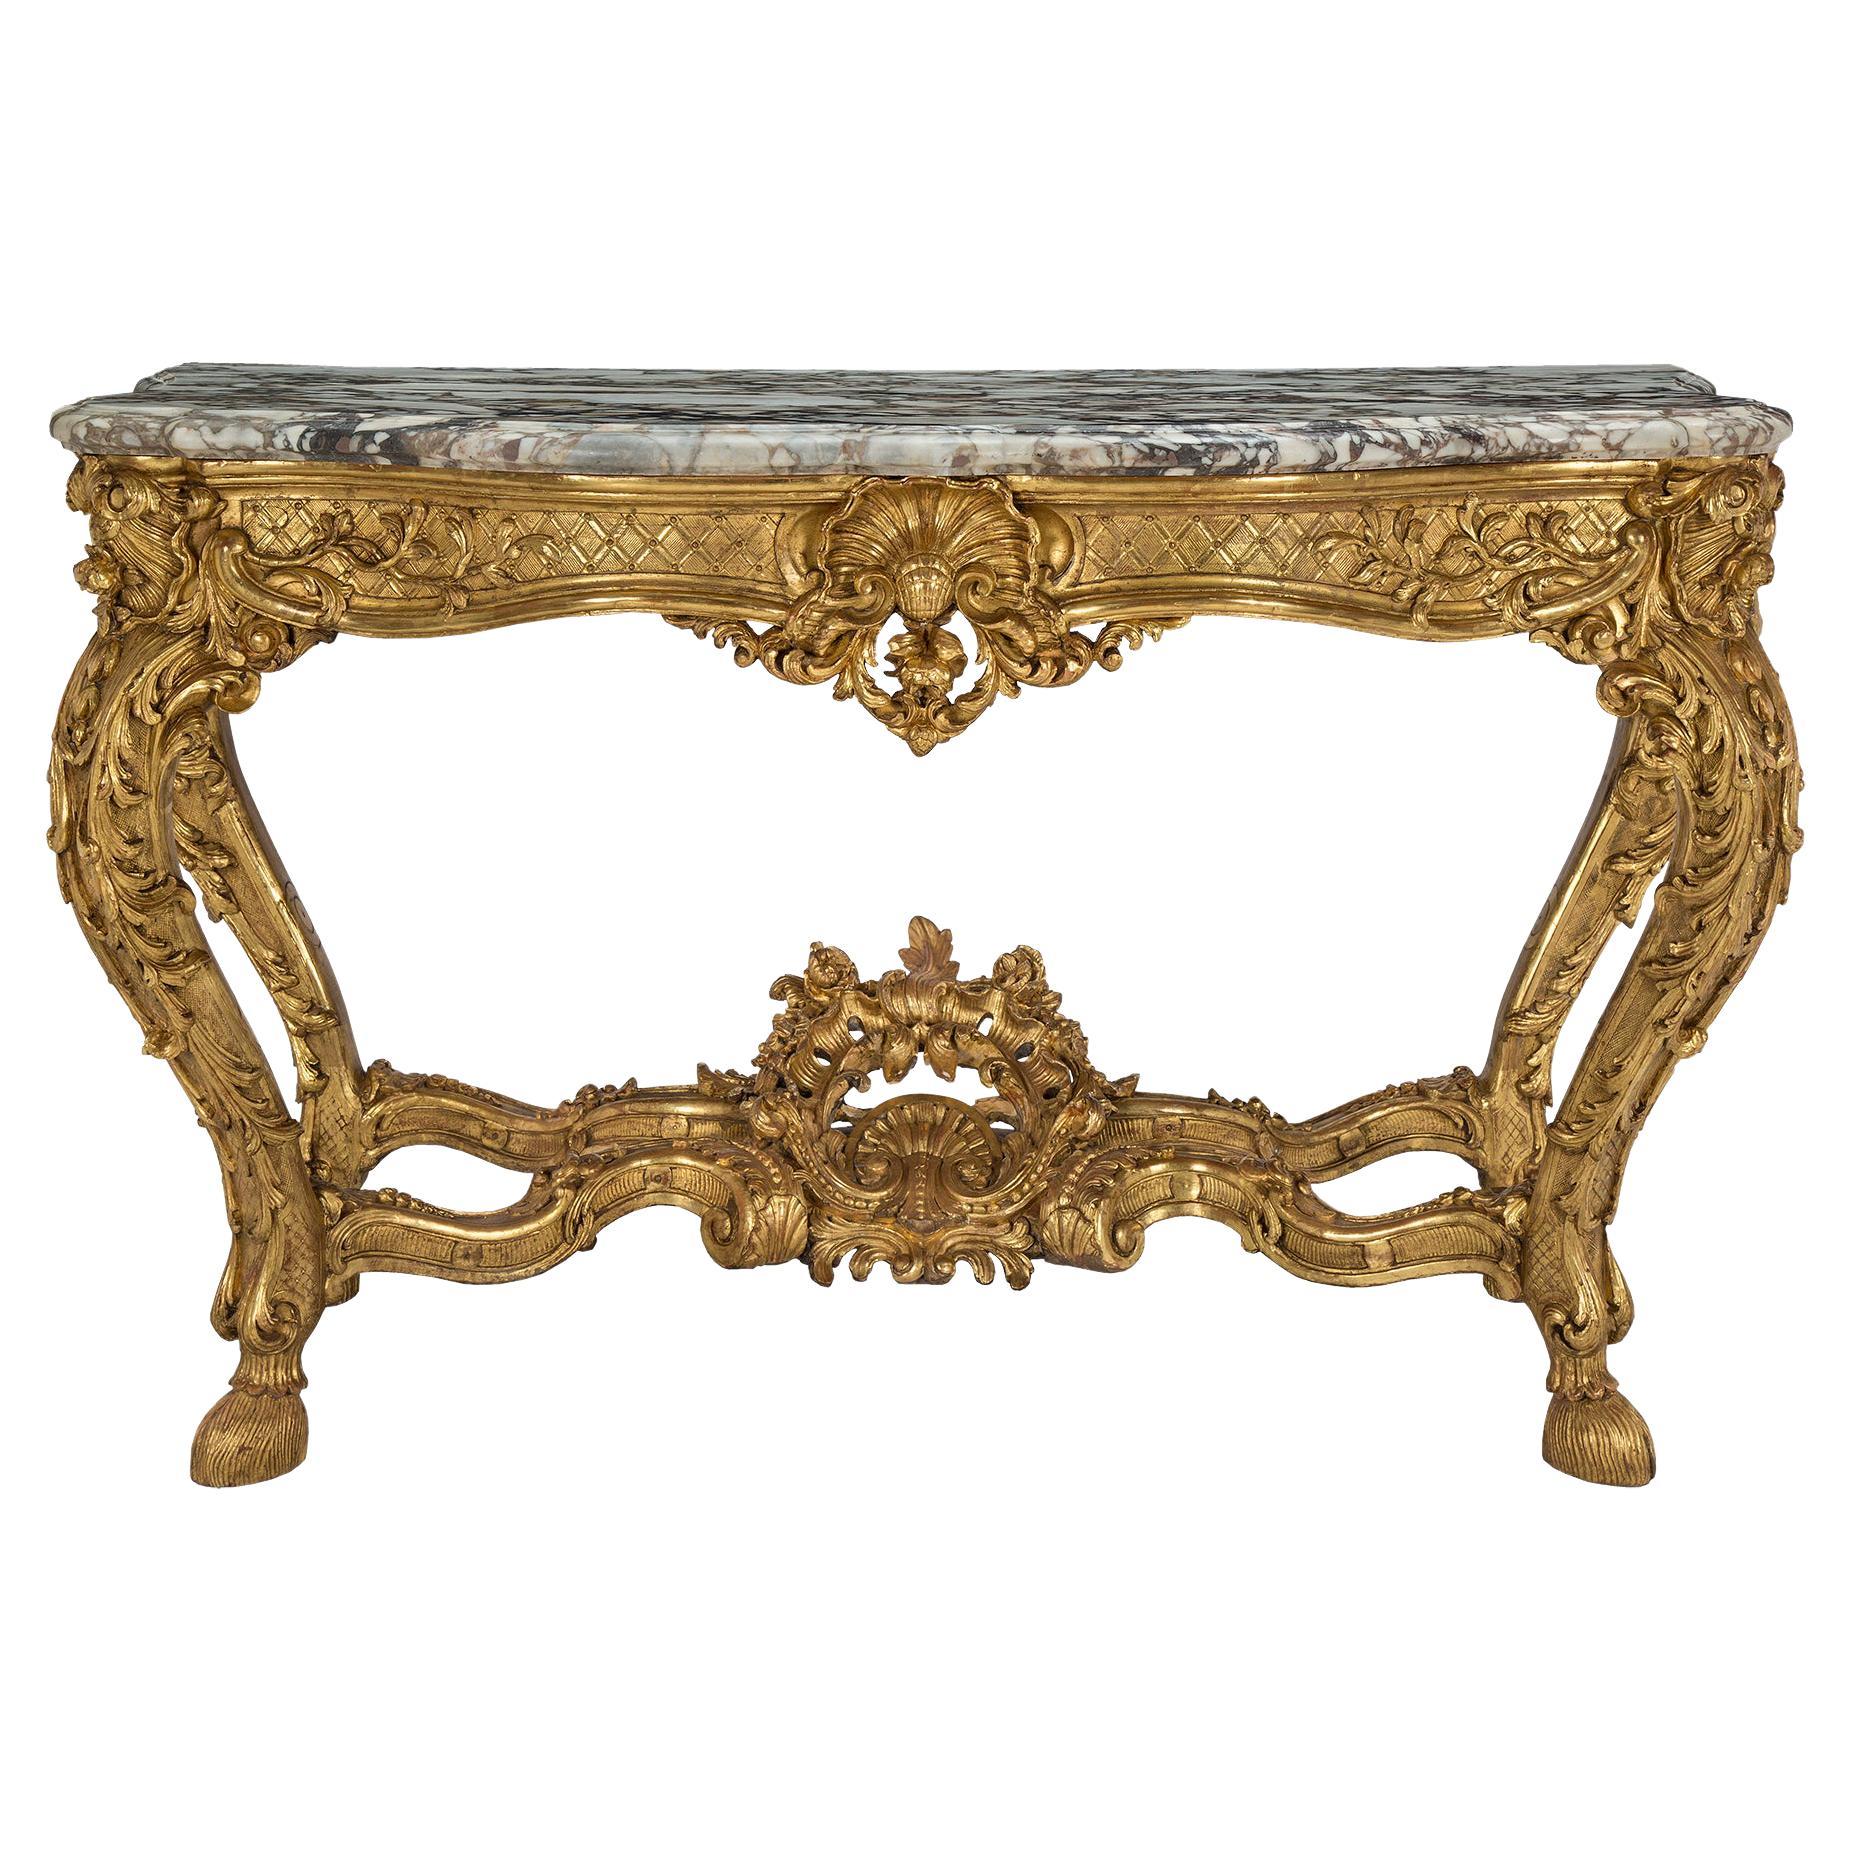 French 18th Century Regence Period Giltwood and Marble Freestanding Console